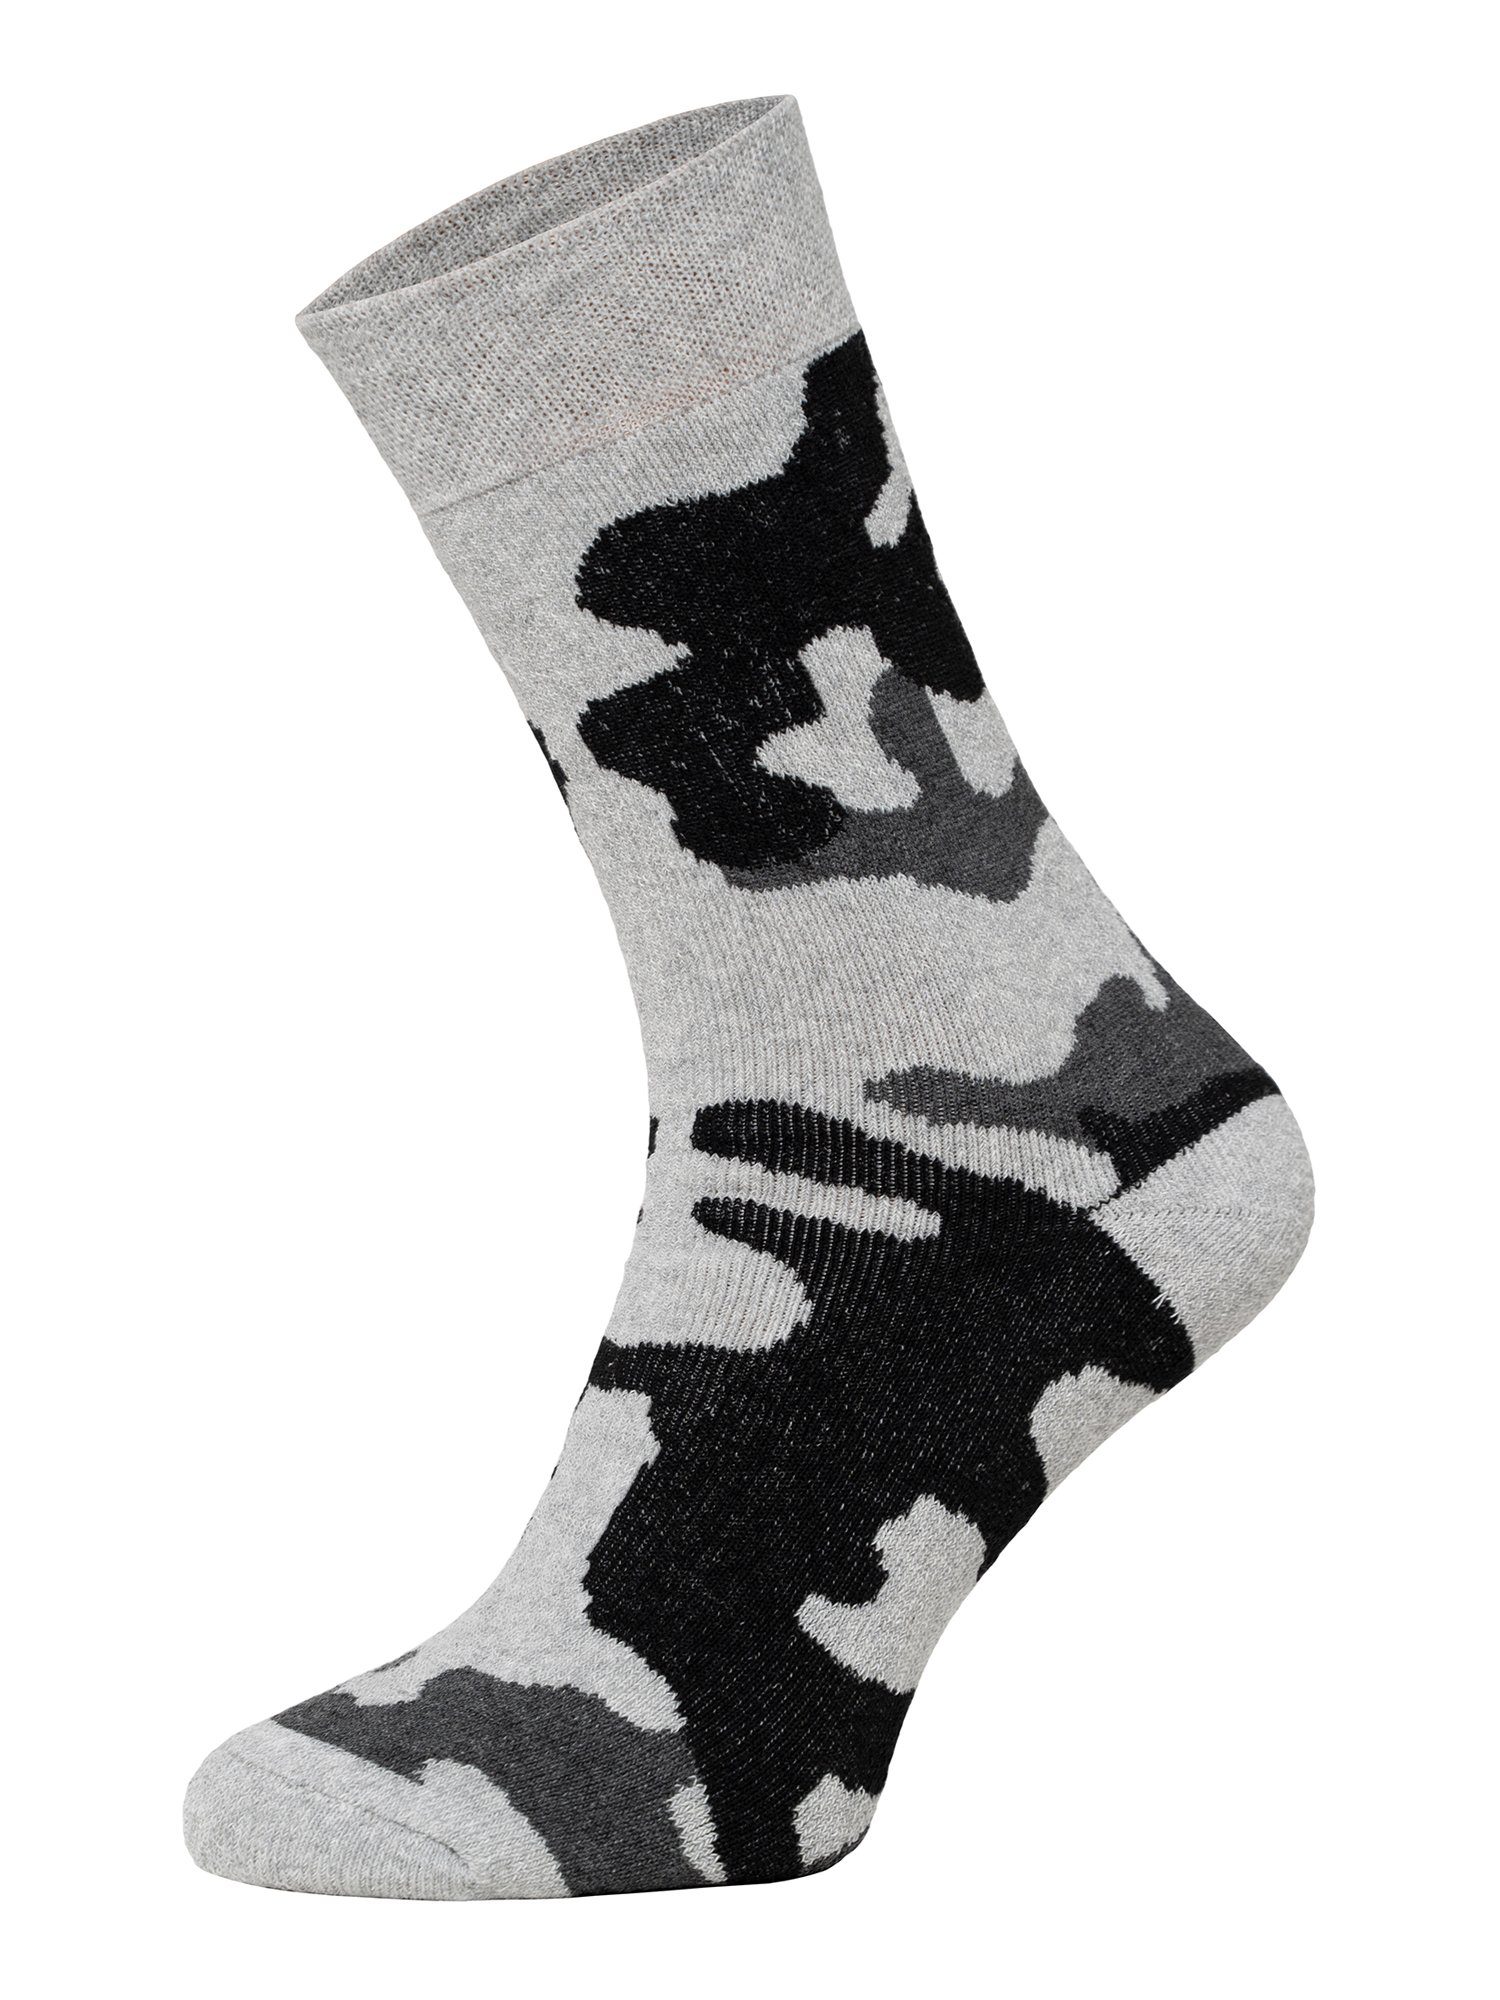 Chili Lifestyle Thermosocken CHILI THERMO Outdoor (6-Paar)